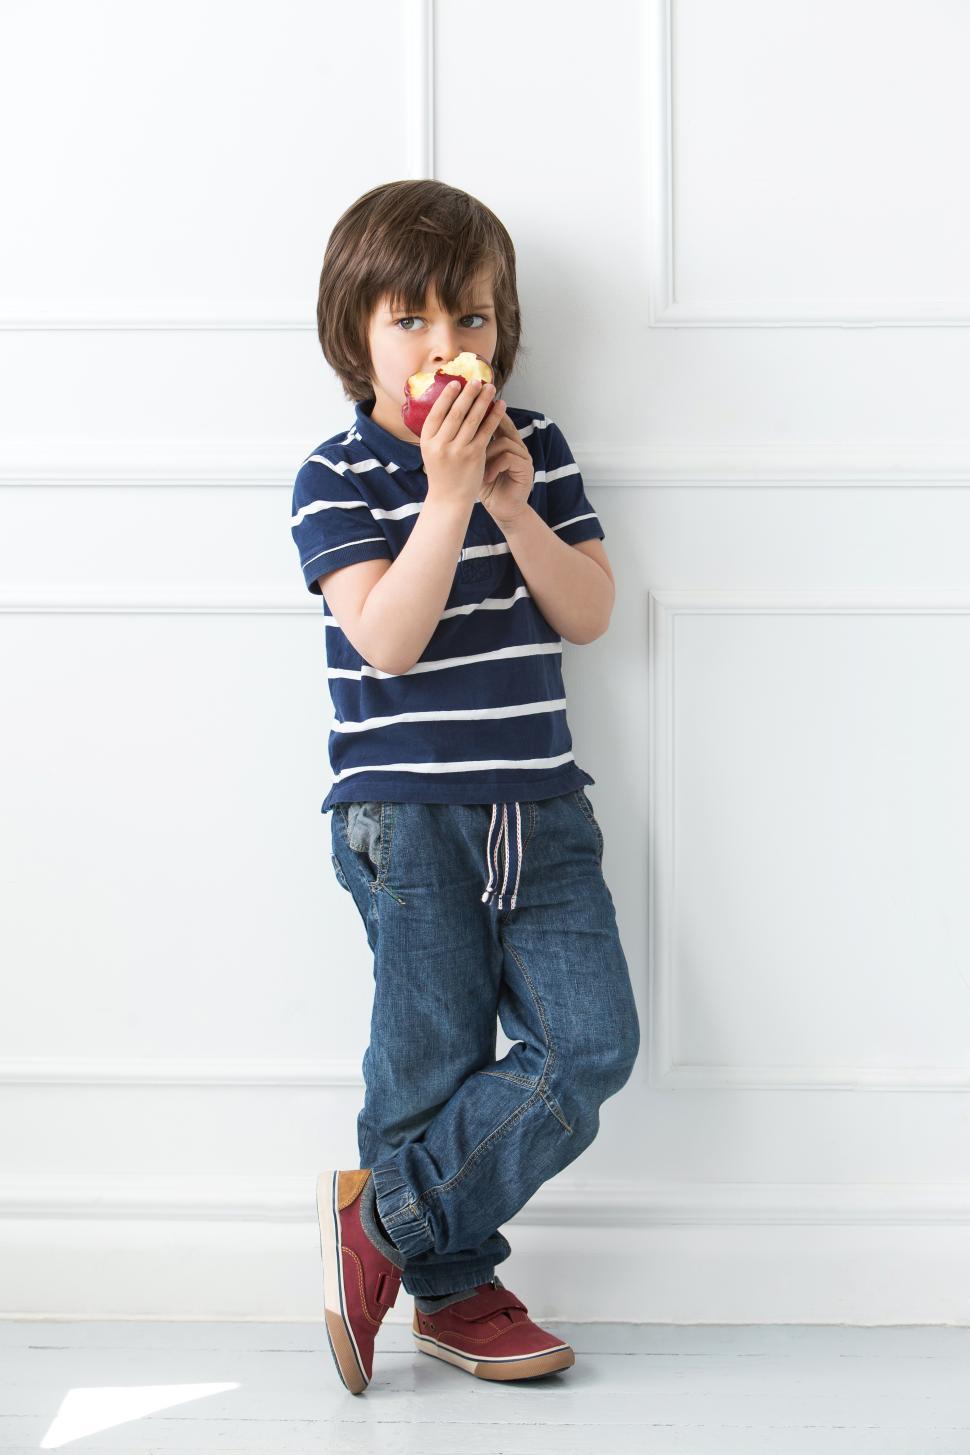 Free Stock Photo of Adorable kid standing and eating apple | Download ...